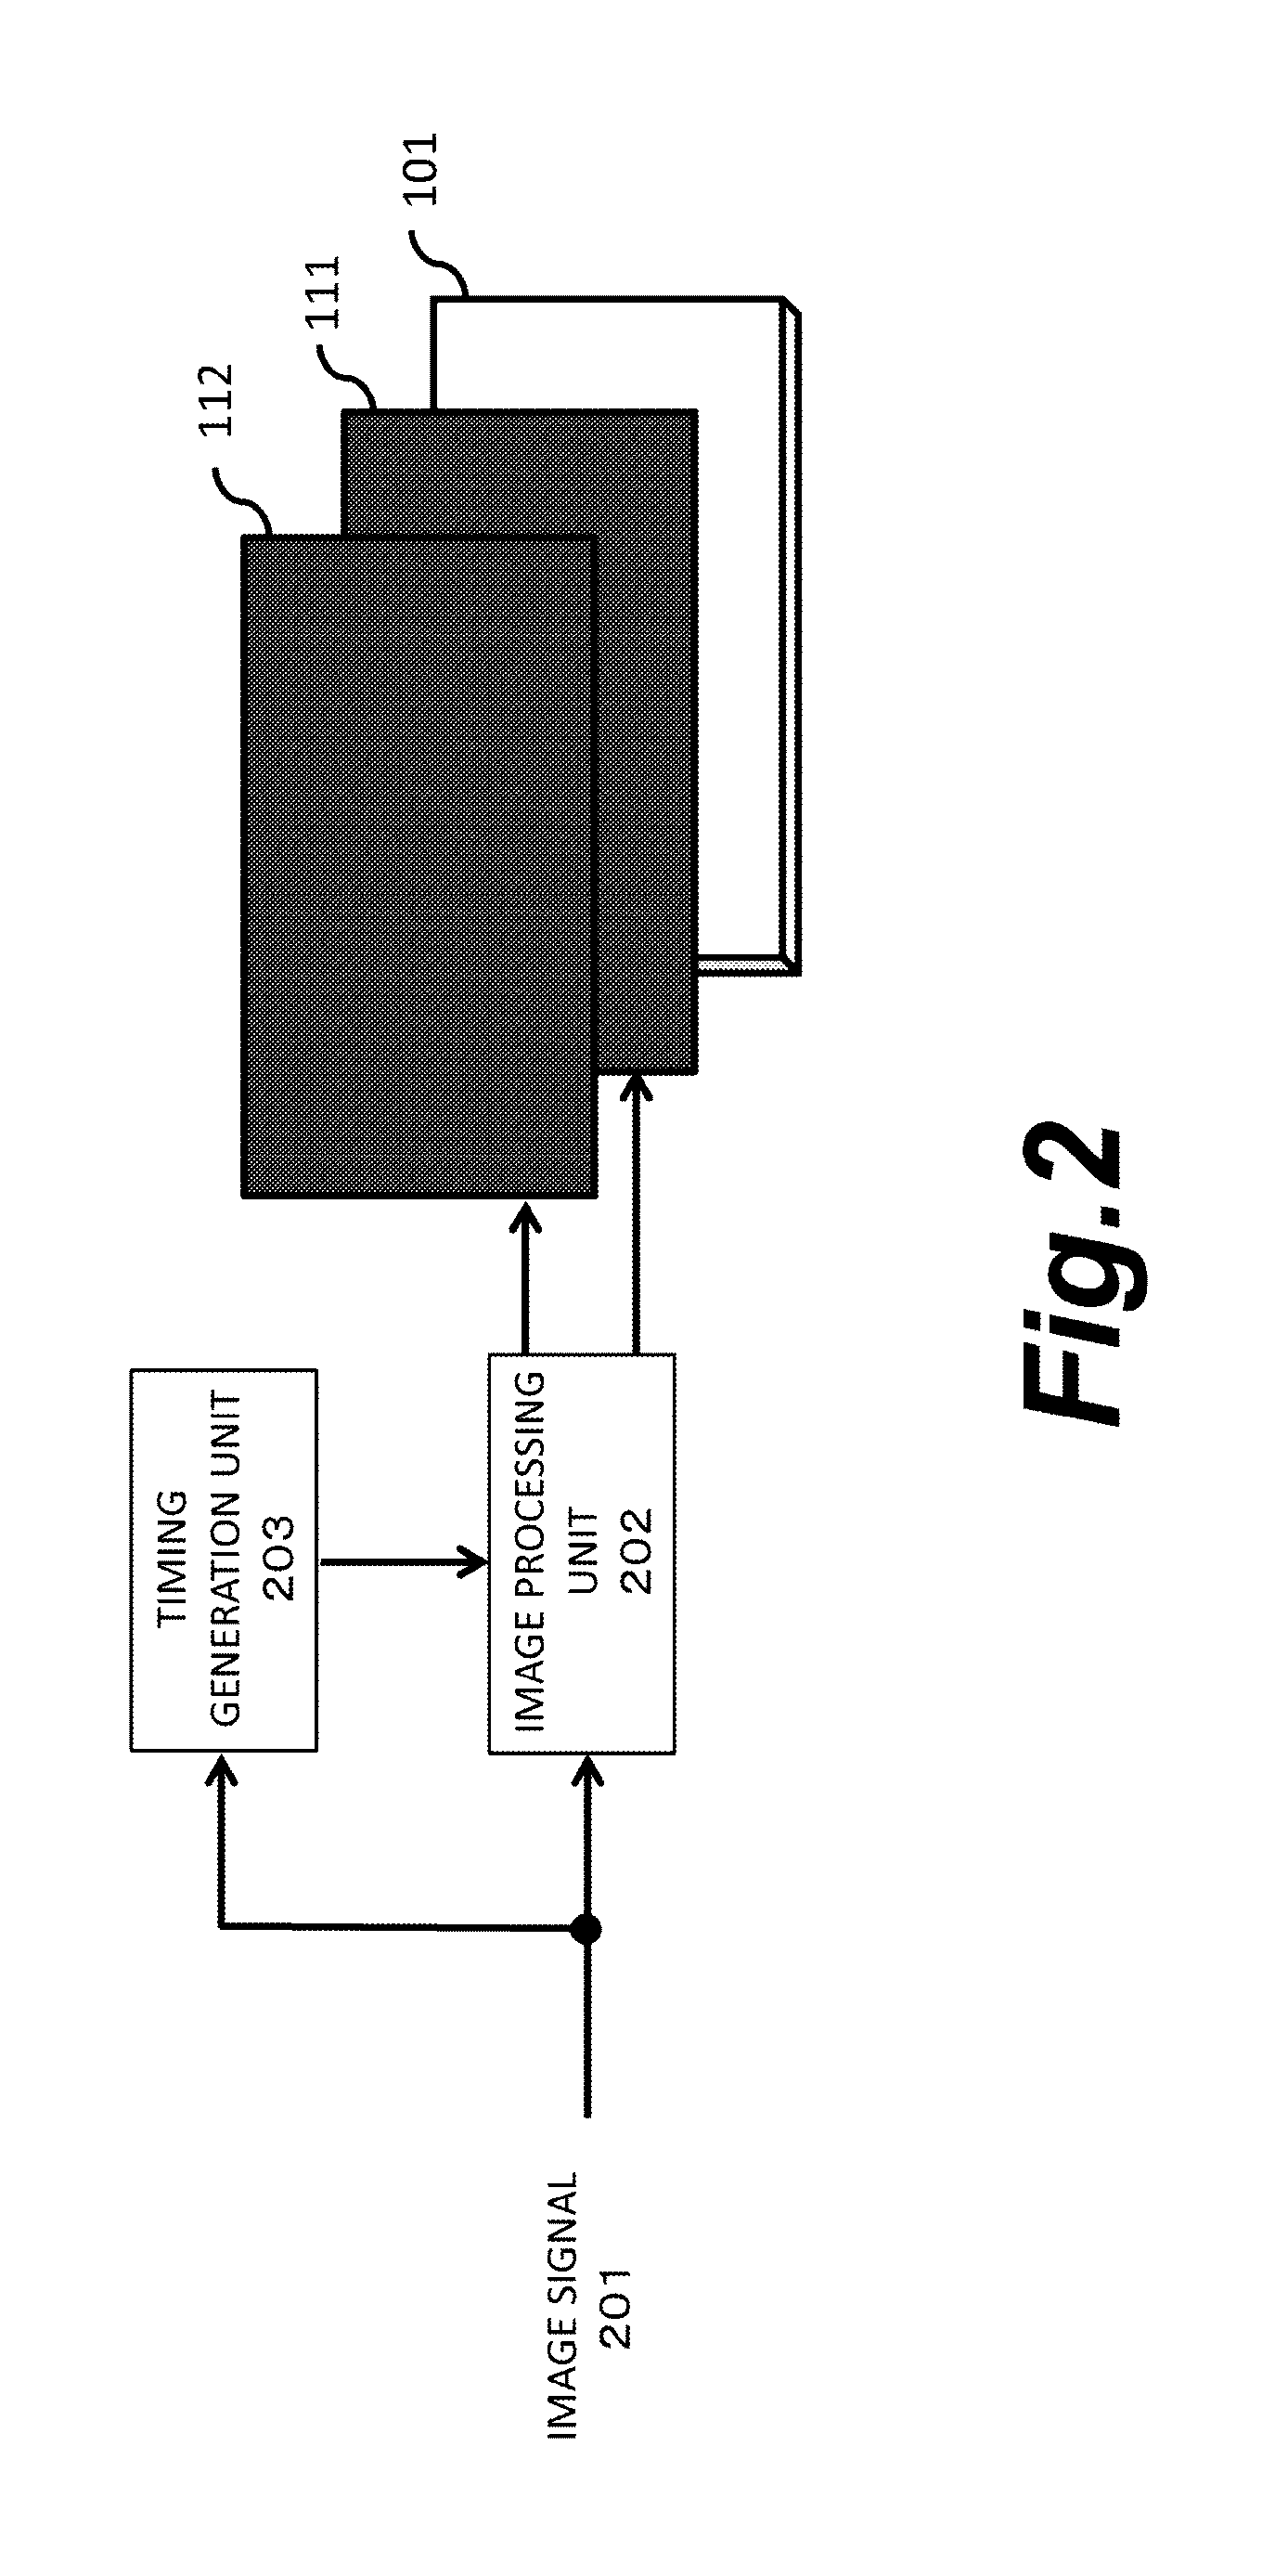 Display device and method of controlling same